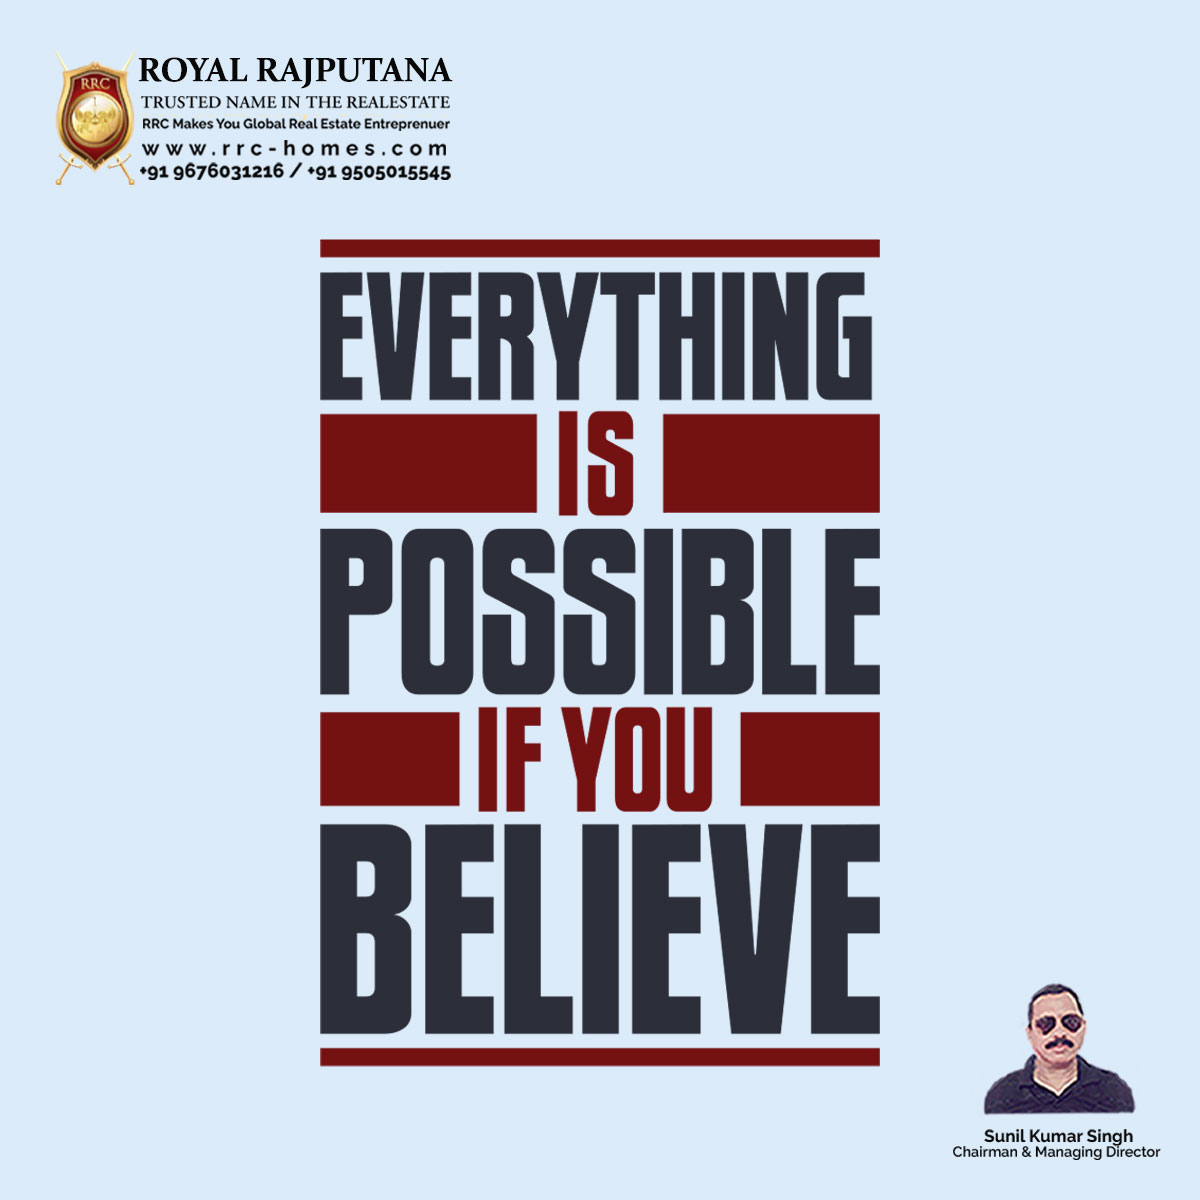 Everything is possible if you believe #royalrajputana #royalrajputanahomes #rrc #rrchomes #sale #lease #rent #propertyservices #partnership #everything #possible #believe #motivational #quote